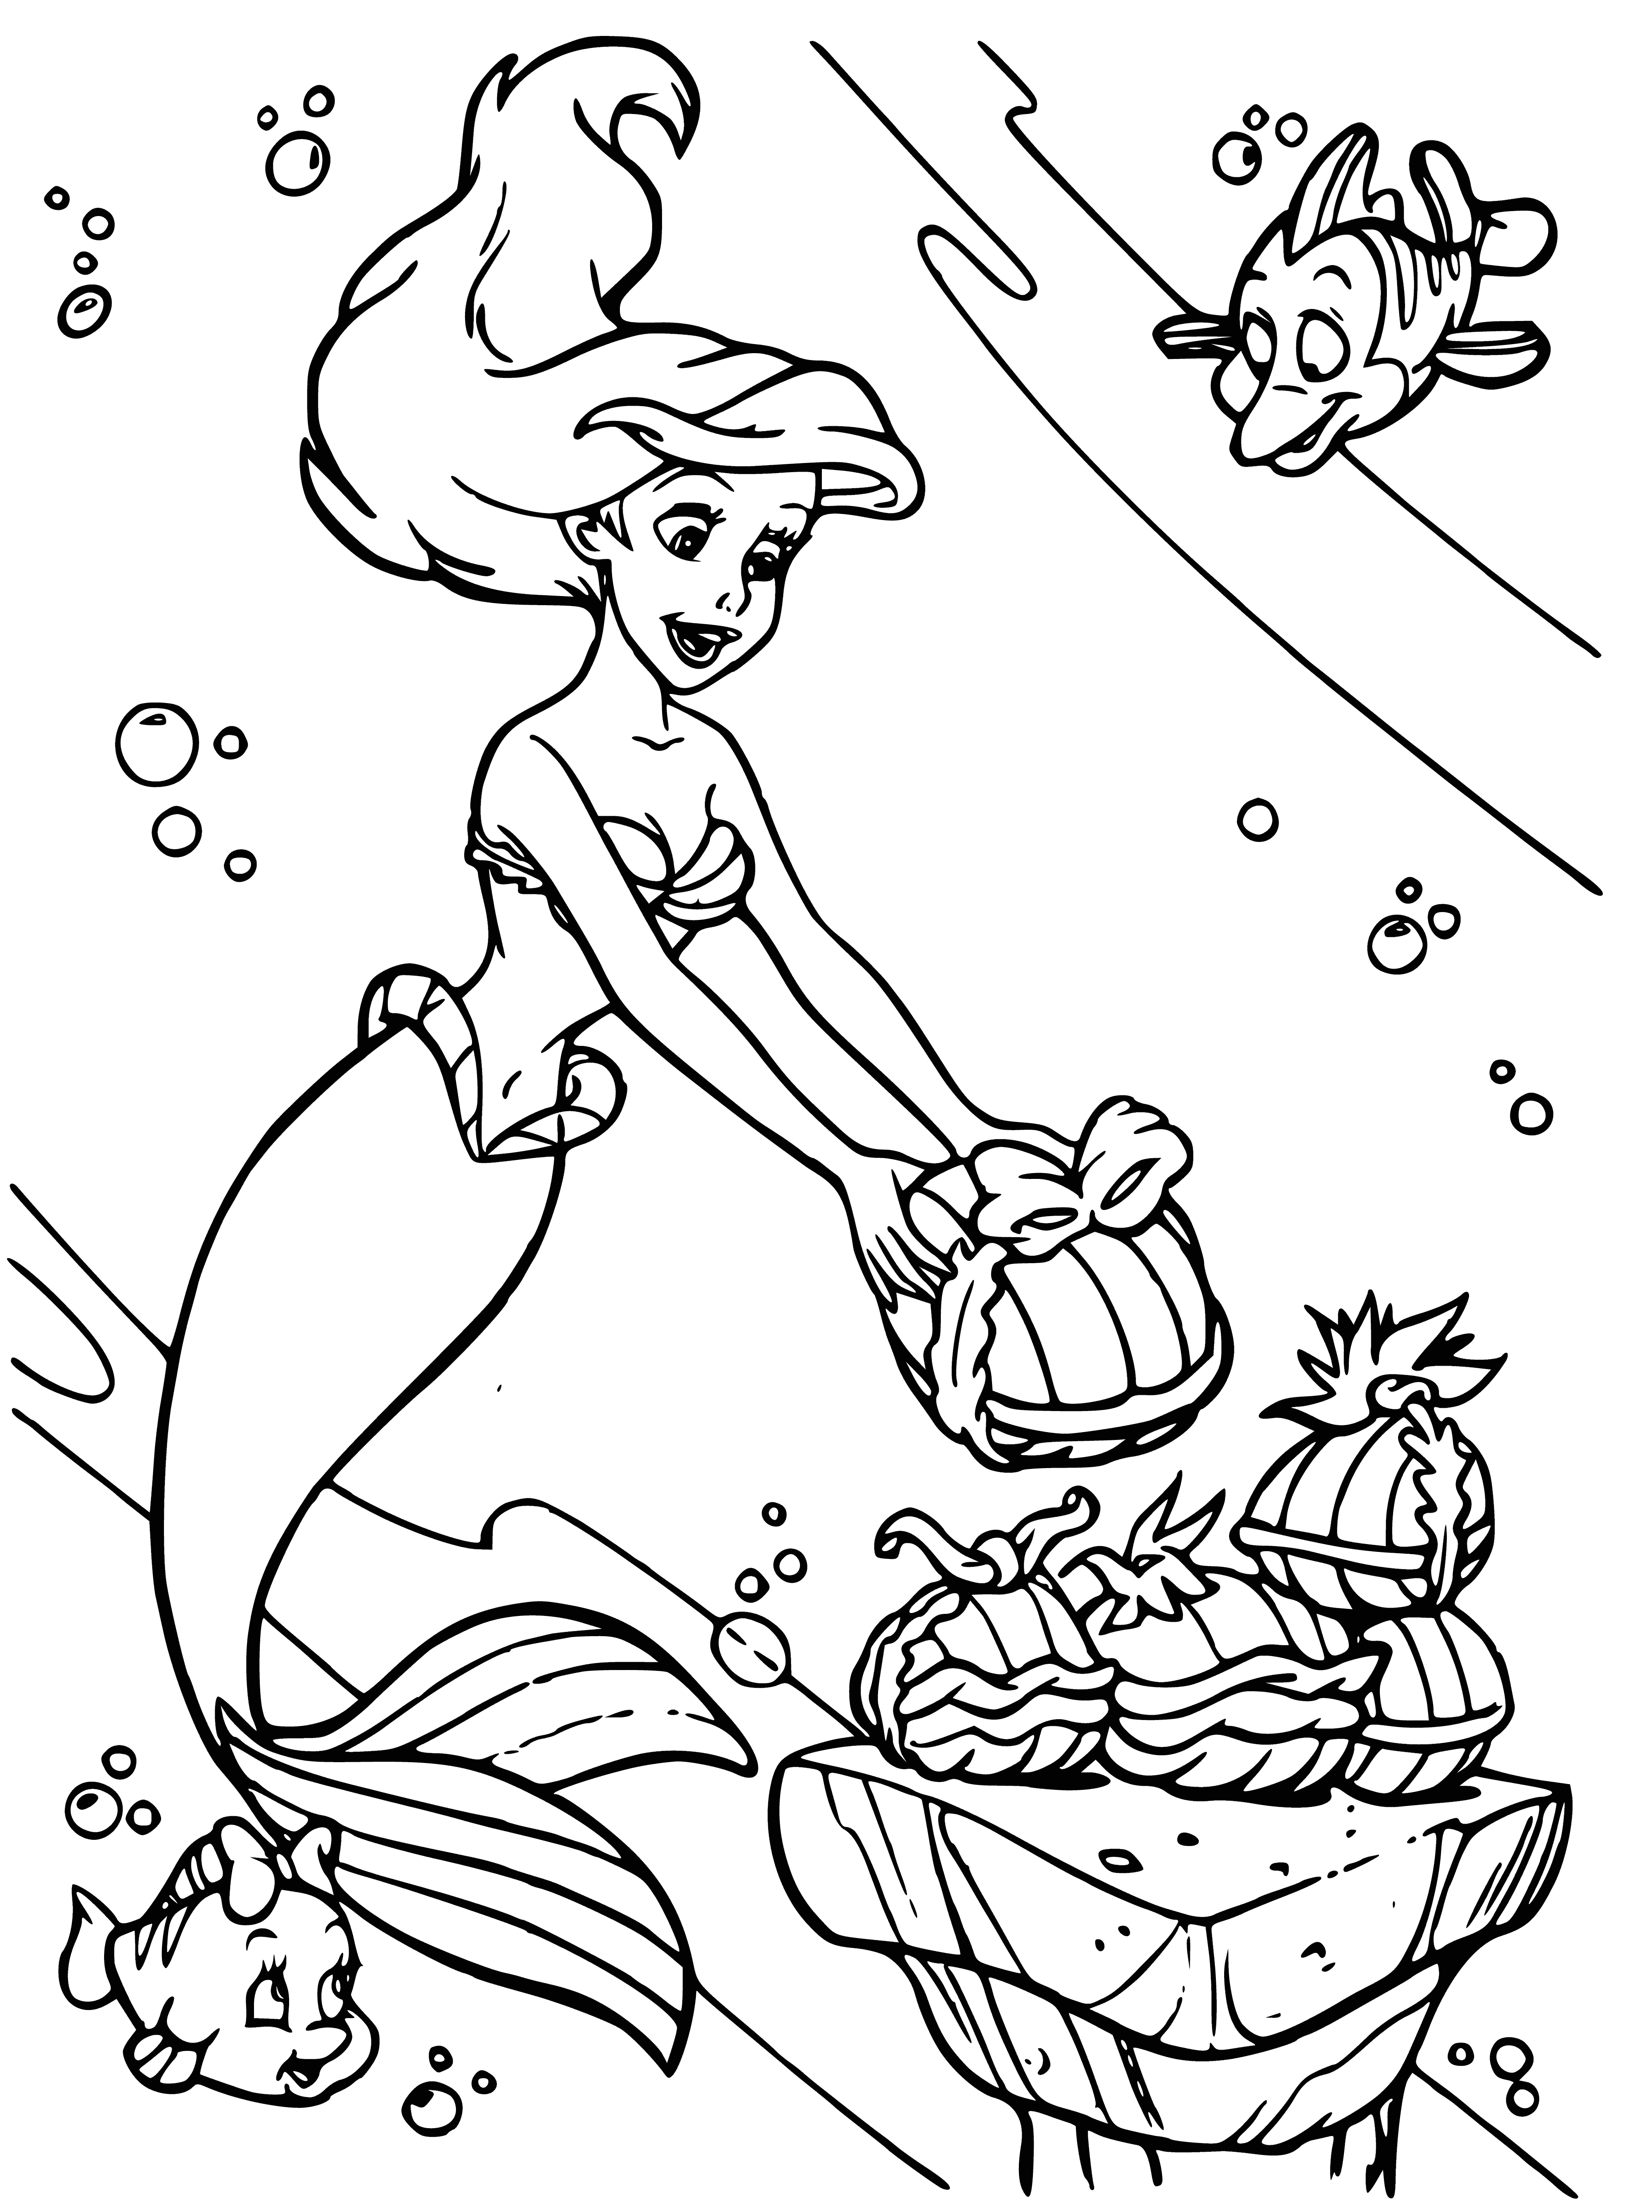 Gifts coloring page